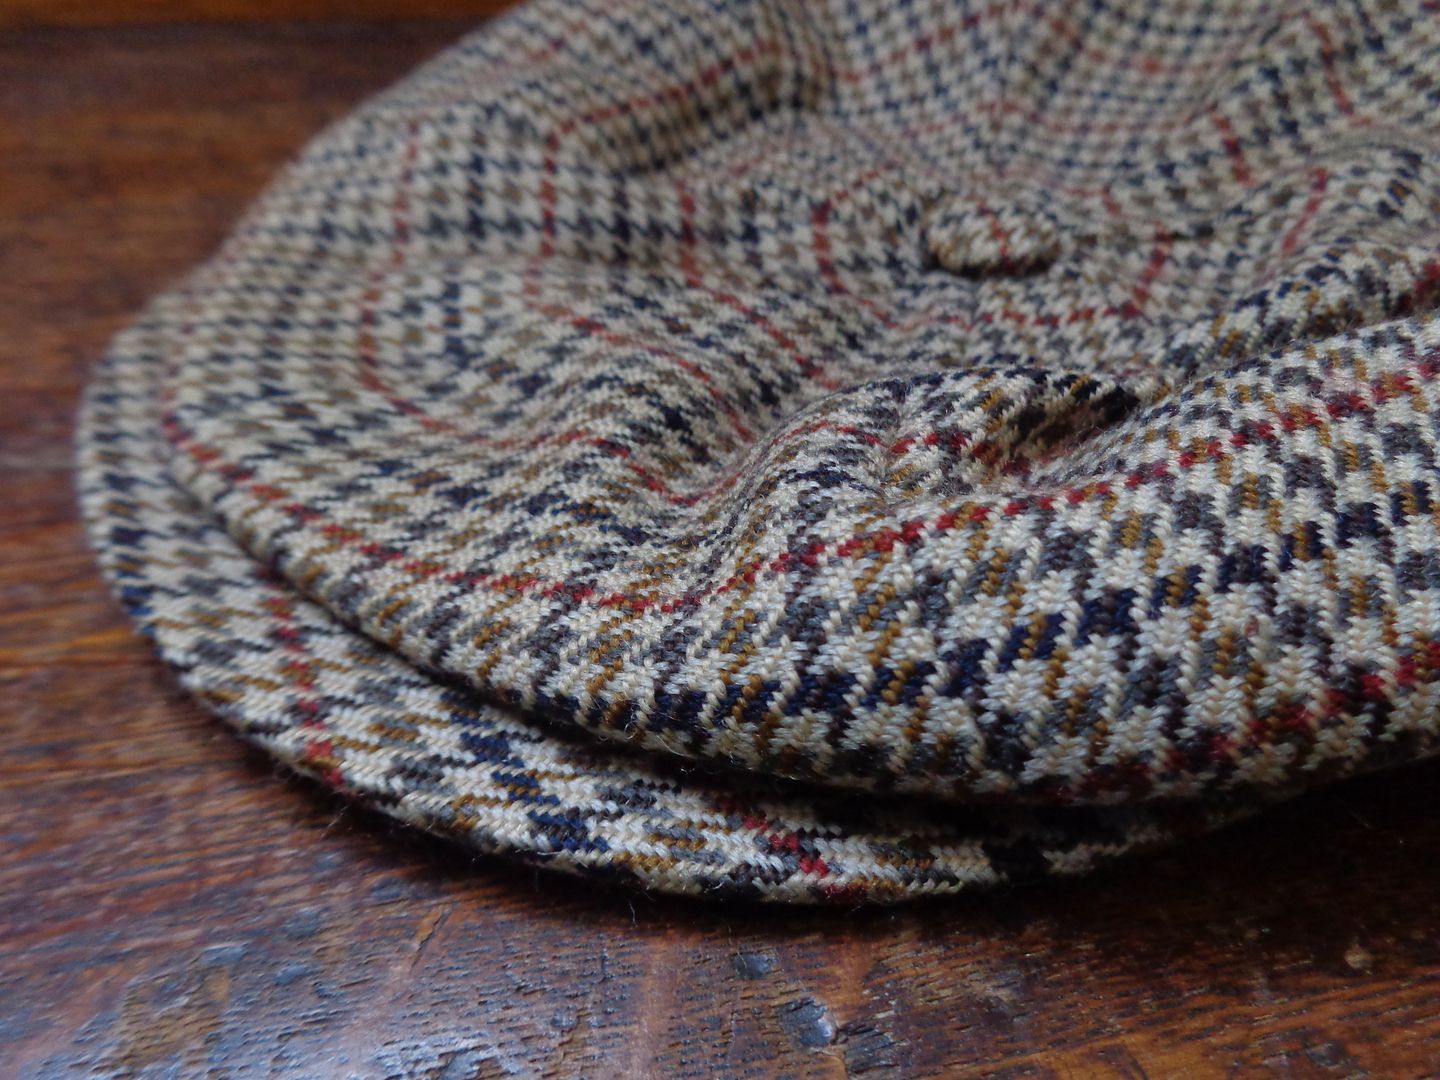 13 CLASSIC HATS! Harris & Donegal Tweed, Vintage Lock & Co, military ...